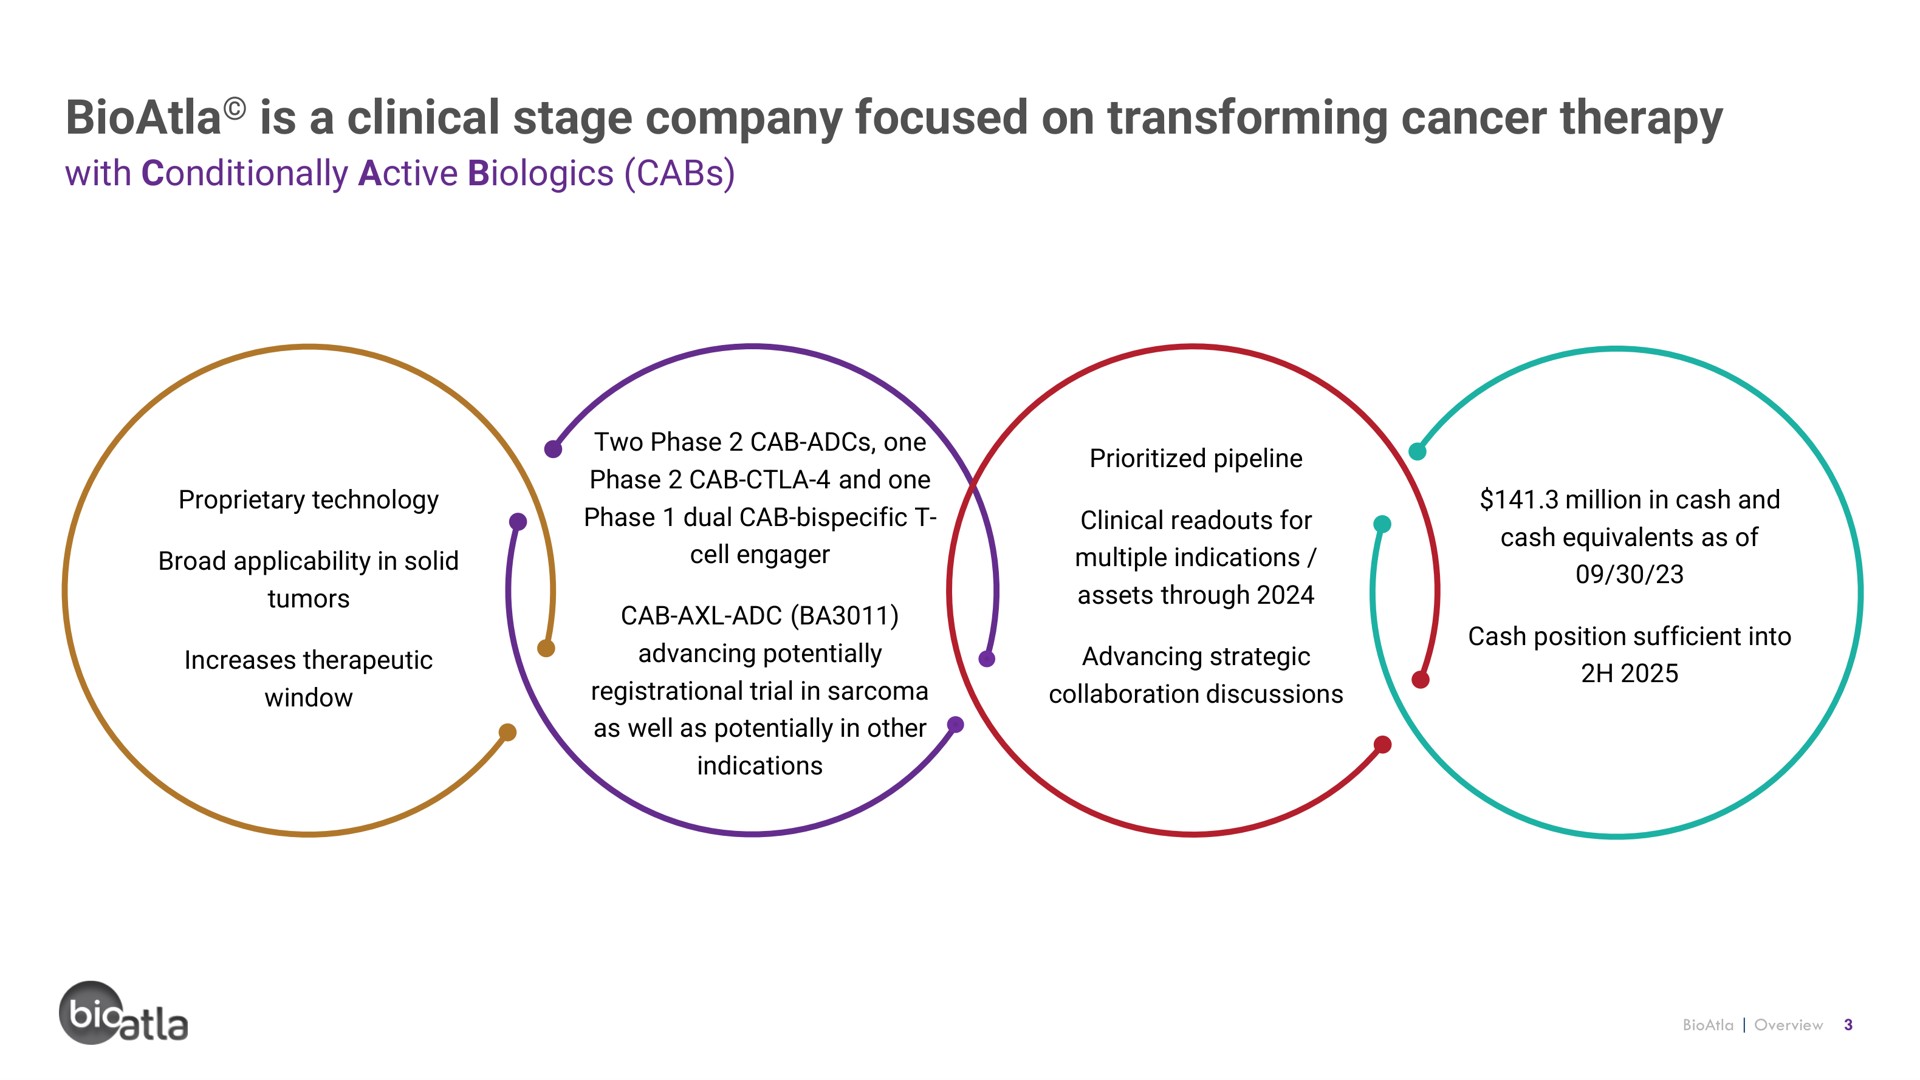 is a clinical stage company focused on transforming cancer therapy | BioAtla